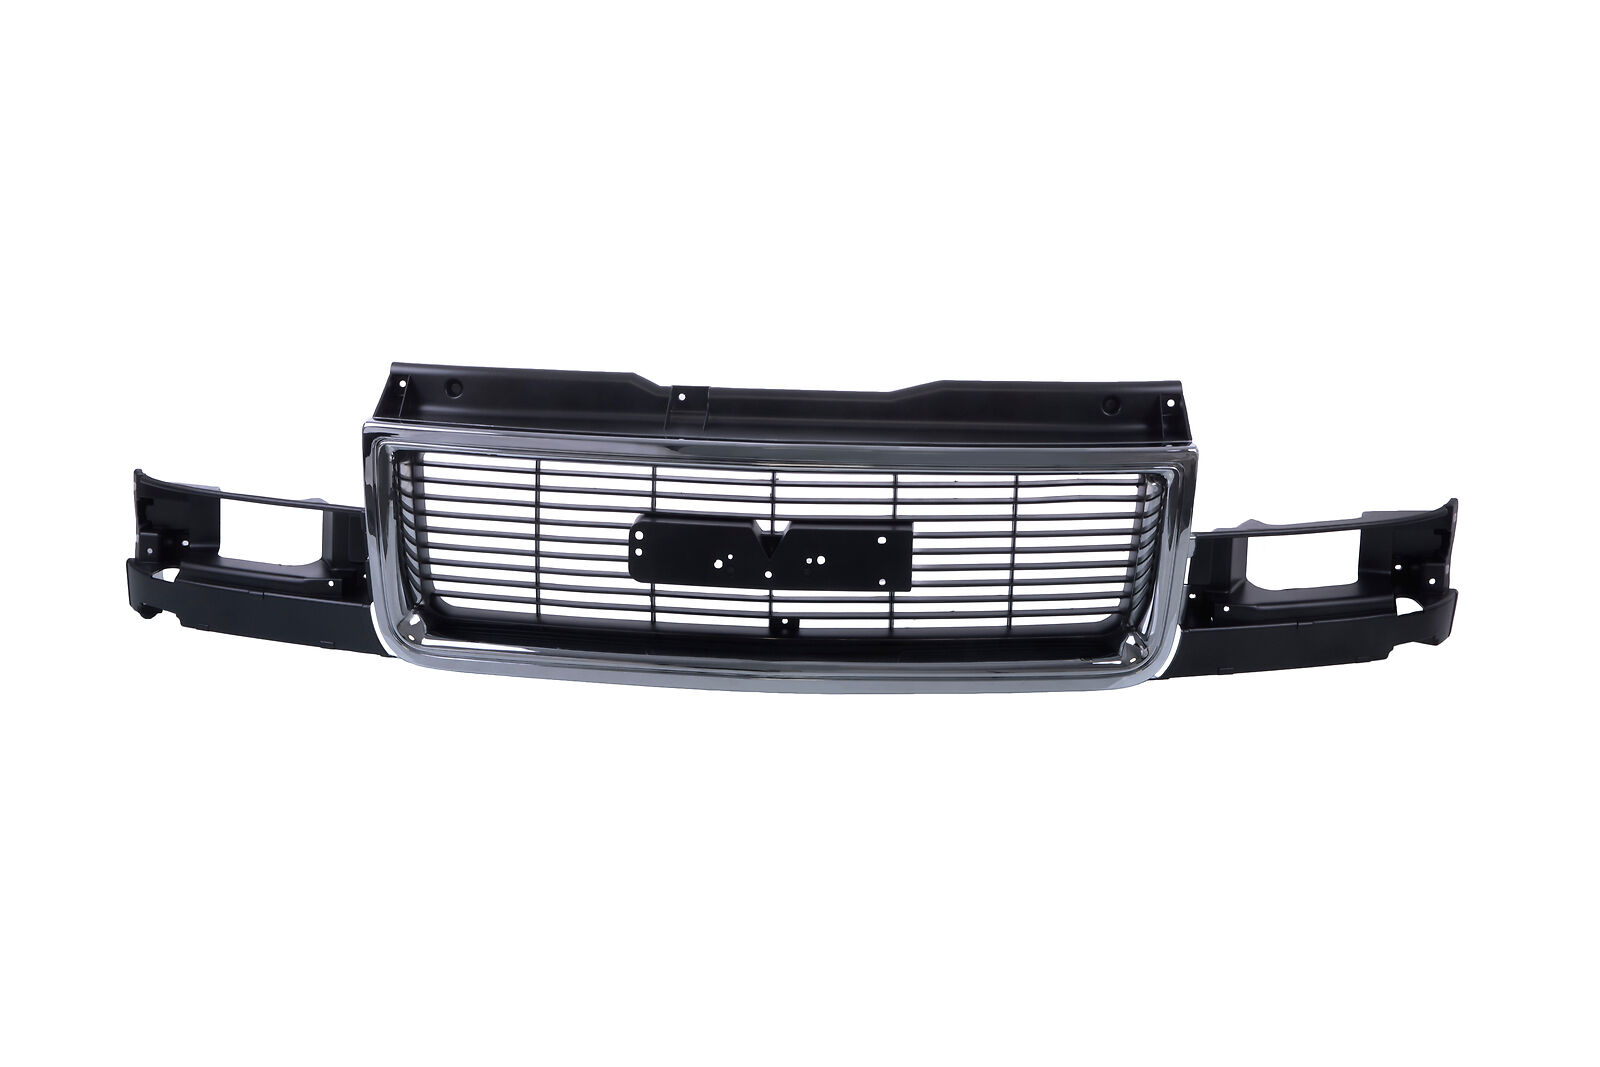 Front Chrome Grille Assembly For 95-06 GMC Safari Van w/Composite Headlamp